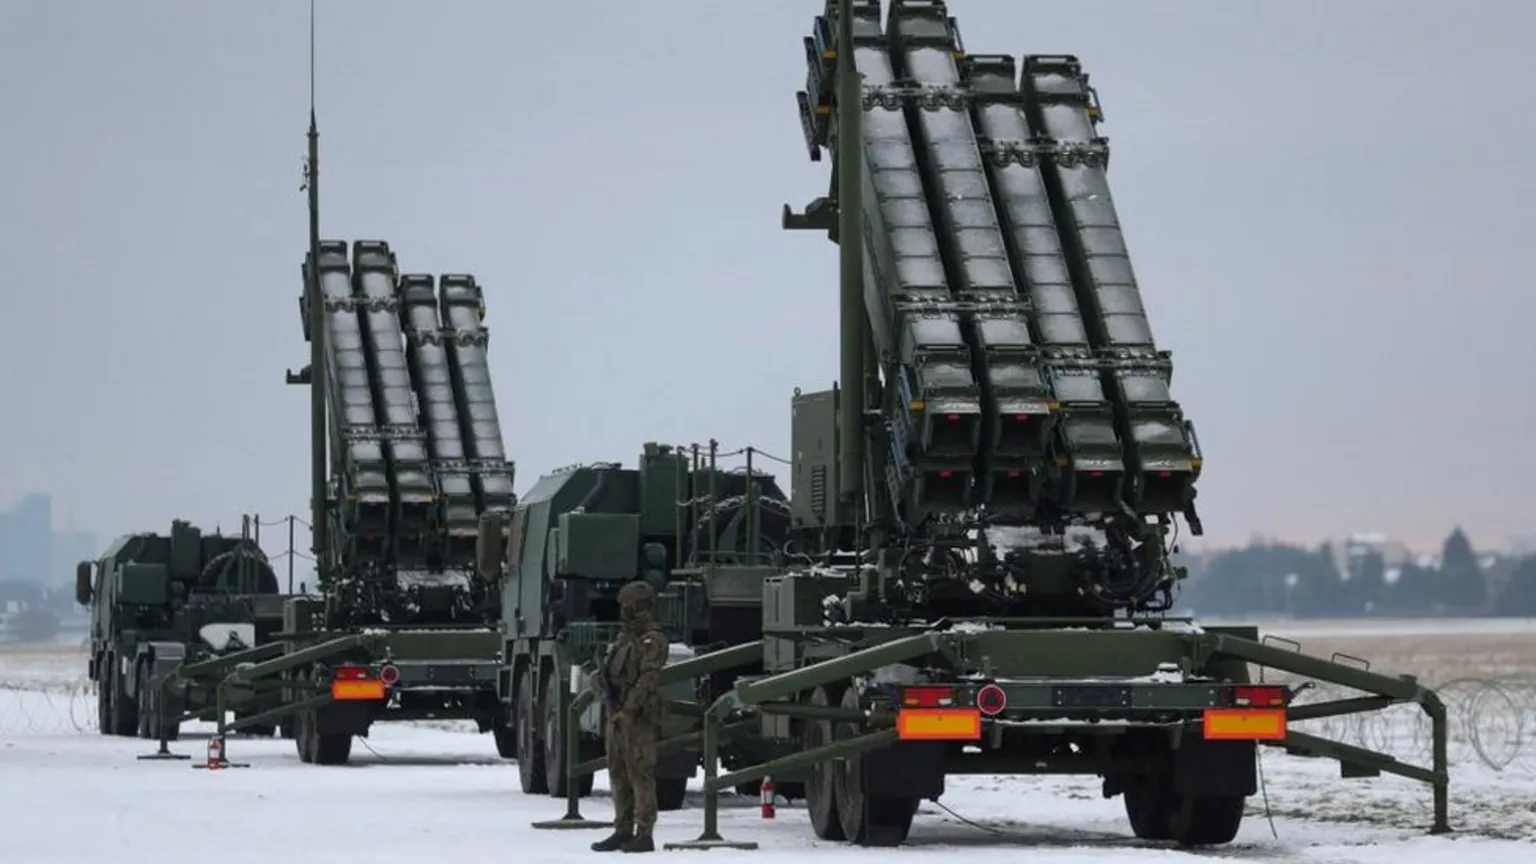 Spain and Greece refuse Patriot missiles to Kyiv